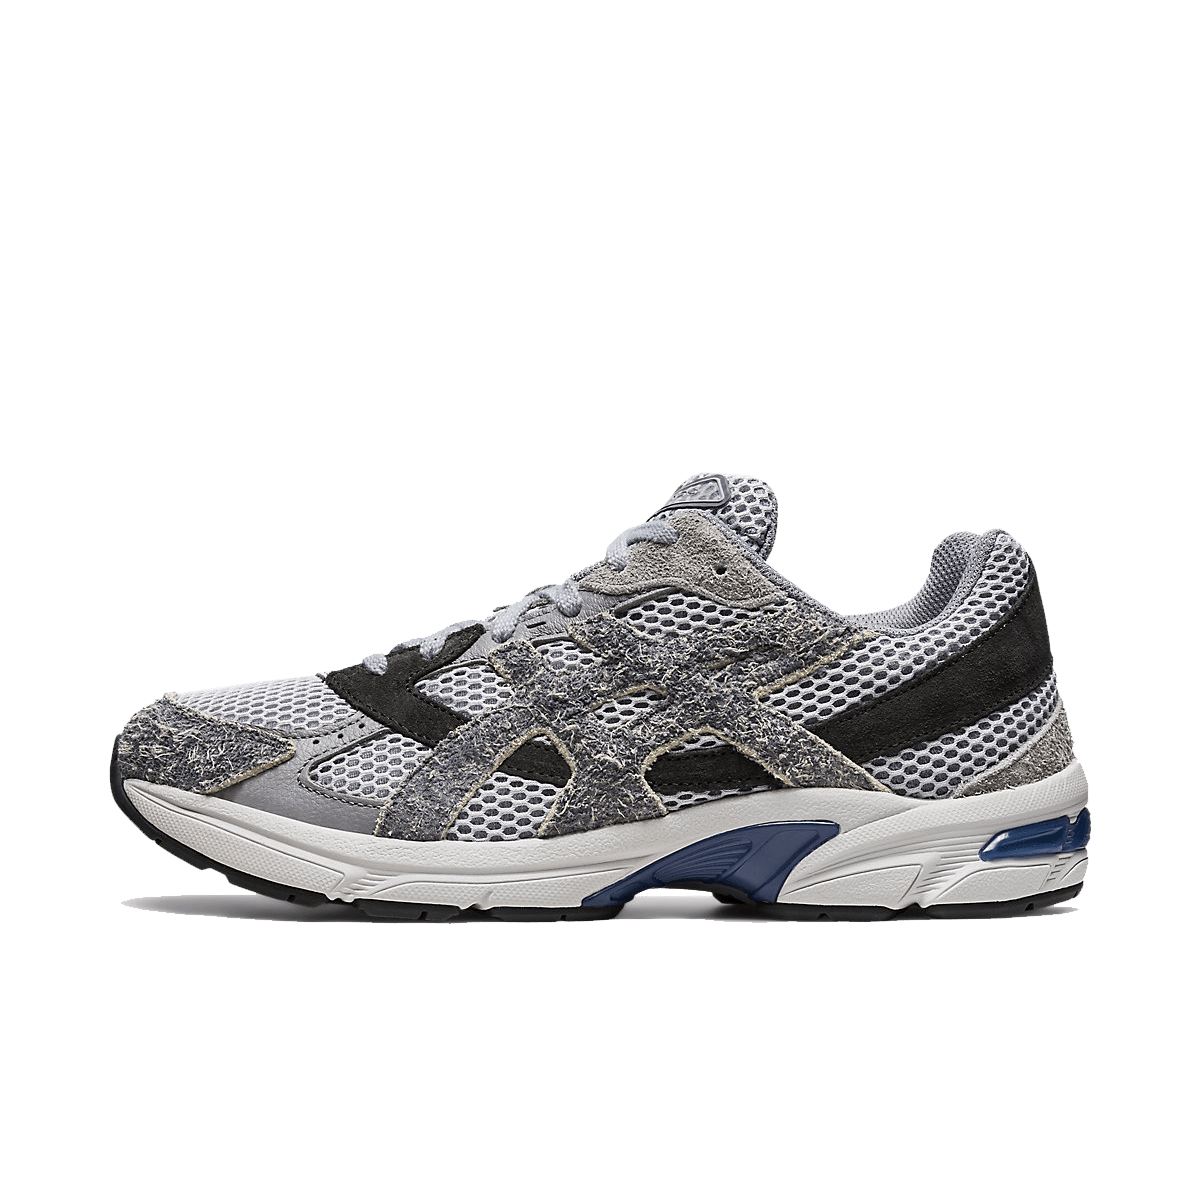 Asics Gel-1130 'Grey' - Hairy Suede Pack 1203A327-021